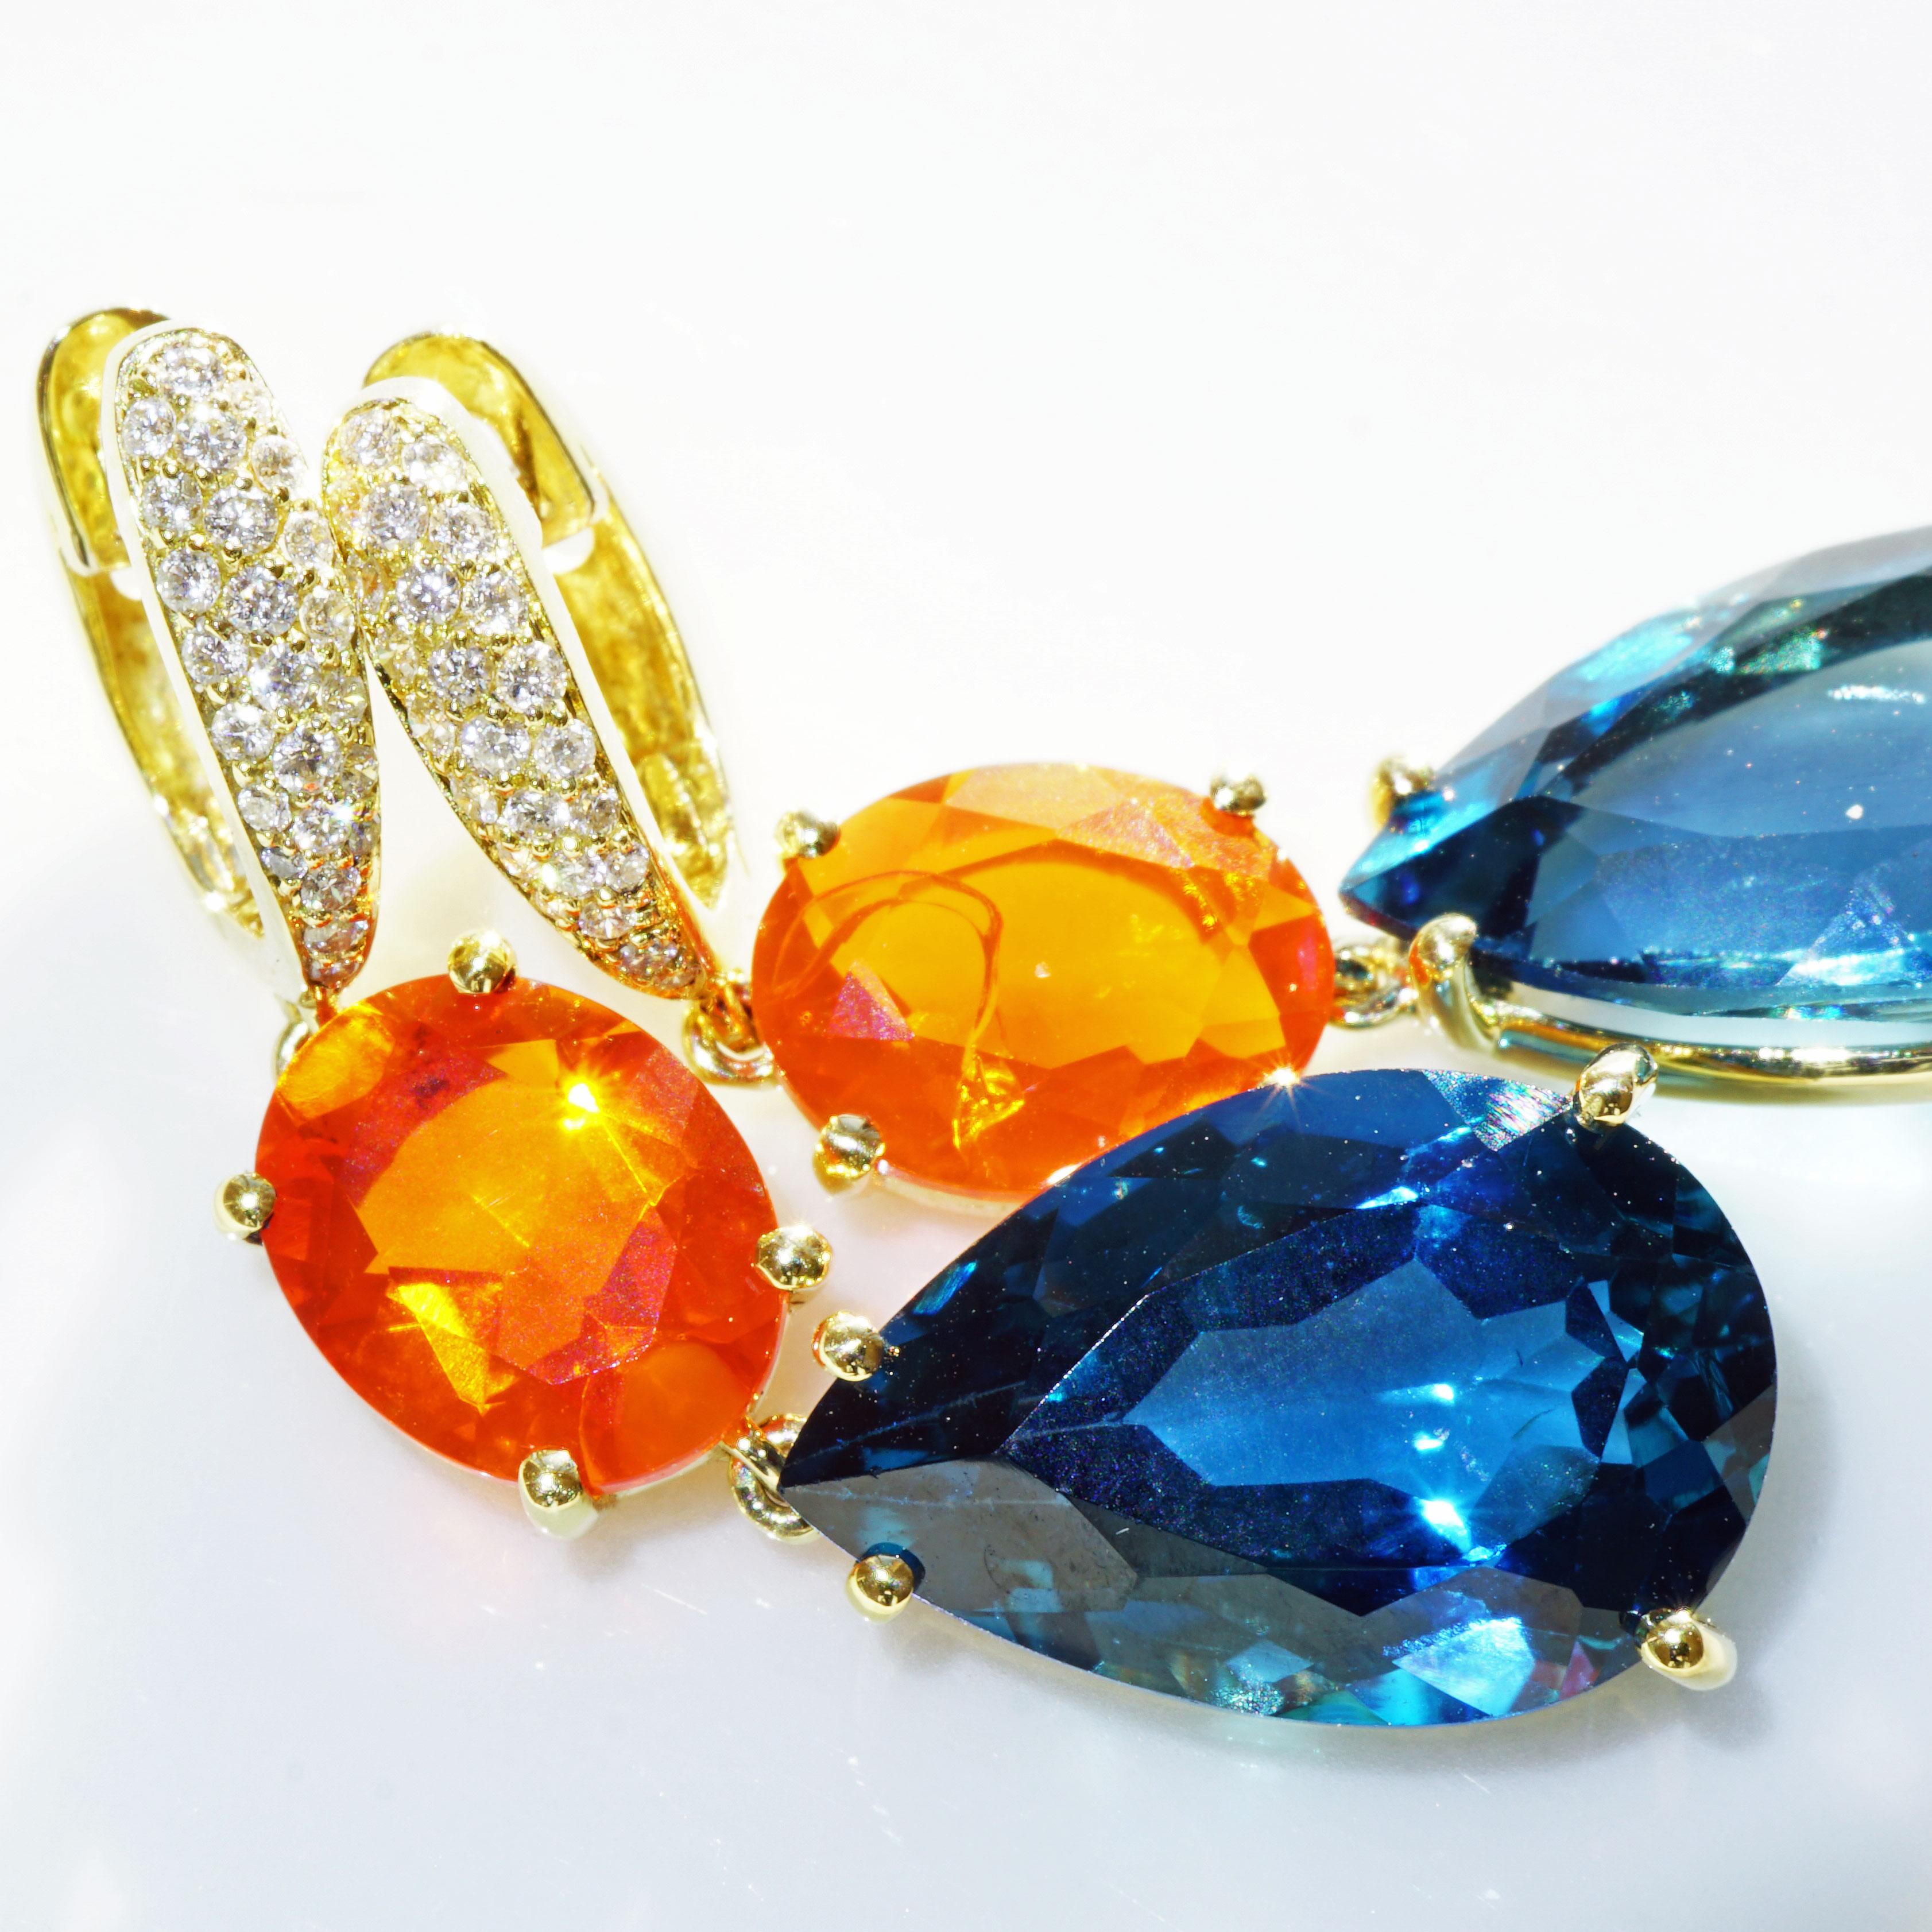 Brilliant Cut Topaz Fireopal Brilliant Earrings Quality Ear Jewellery Wow Colors 18 kt Italy For Sale